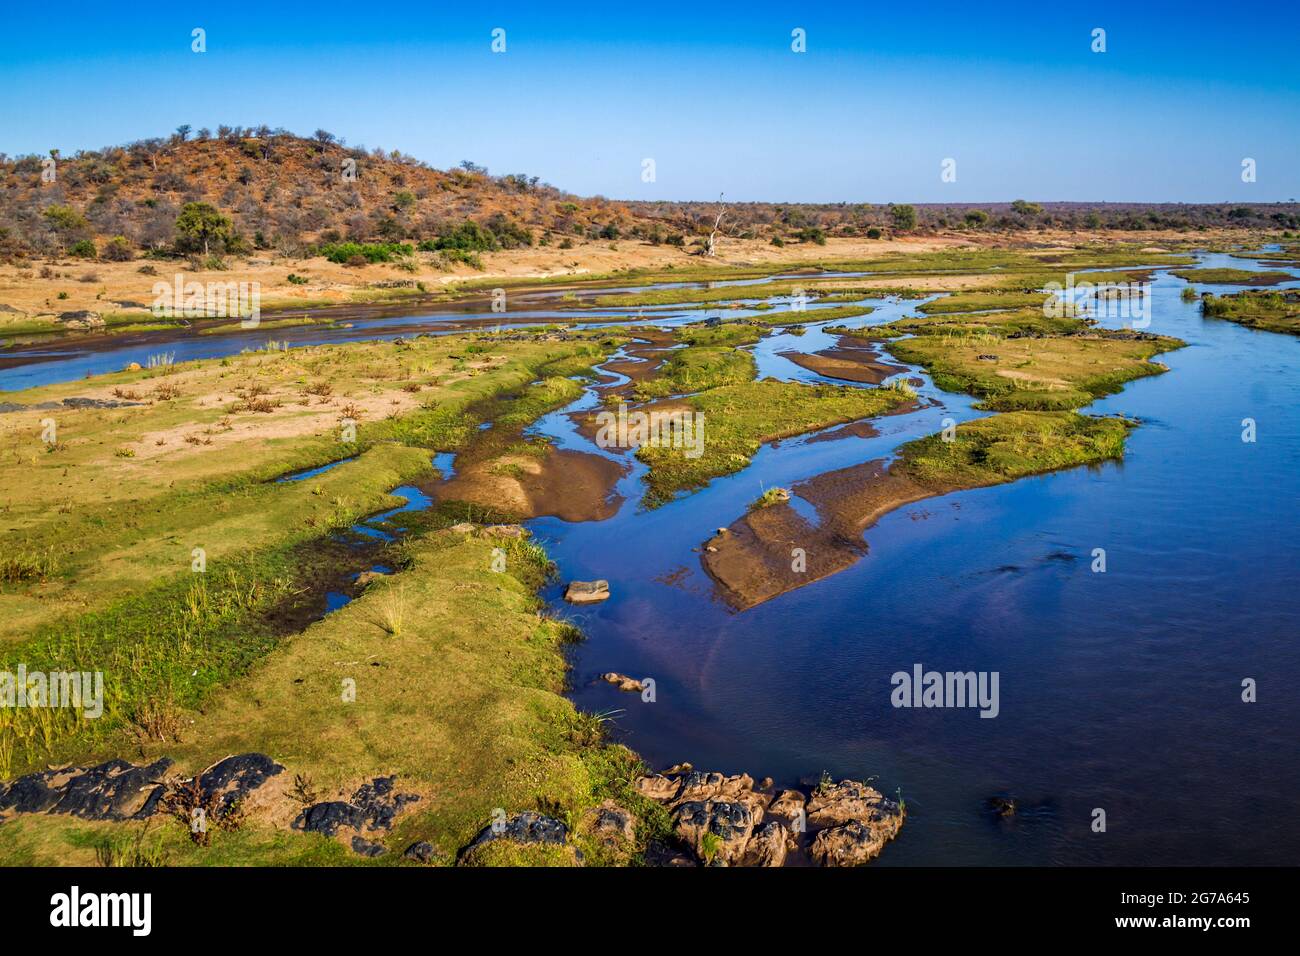 Olifant river scenery in Kruger National park, South Africa Stock Photo